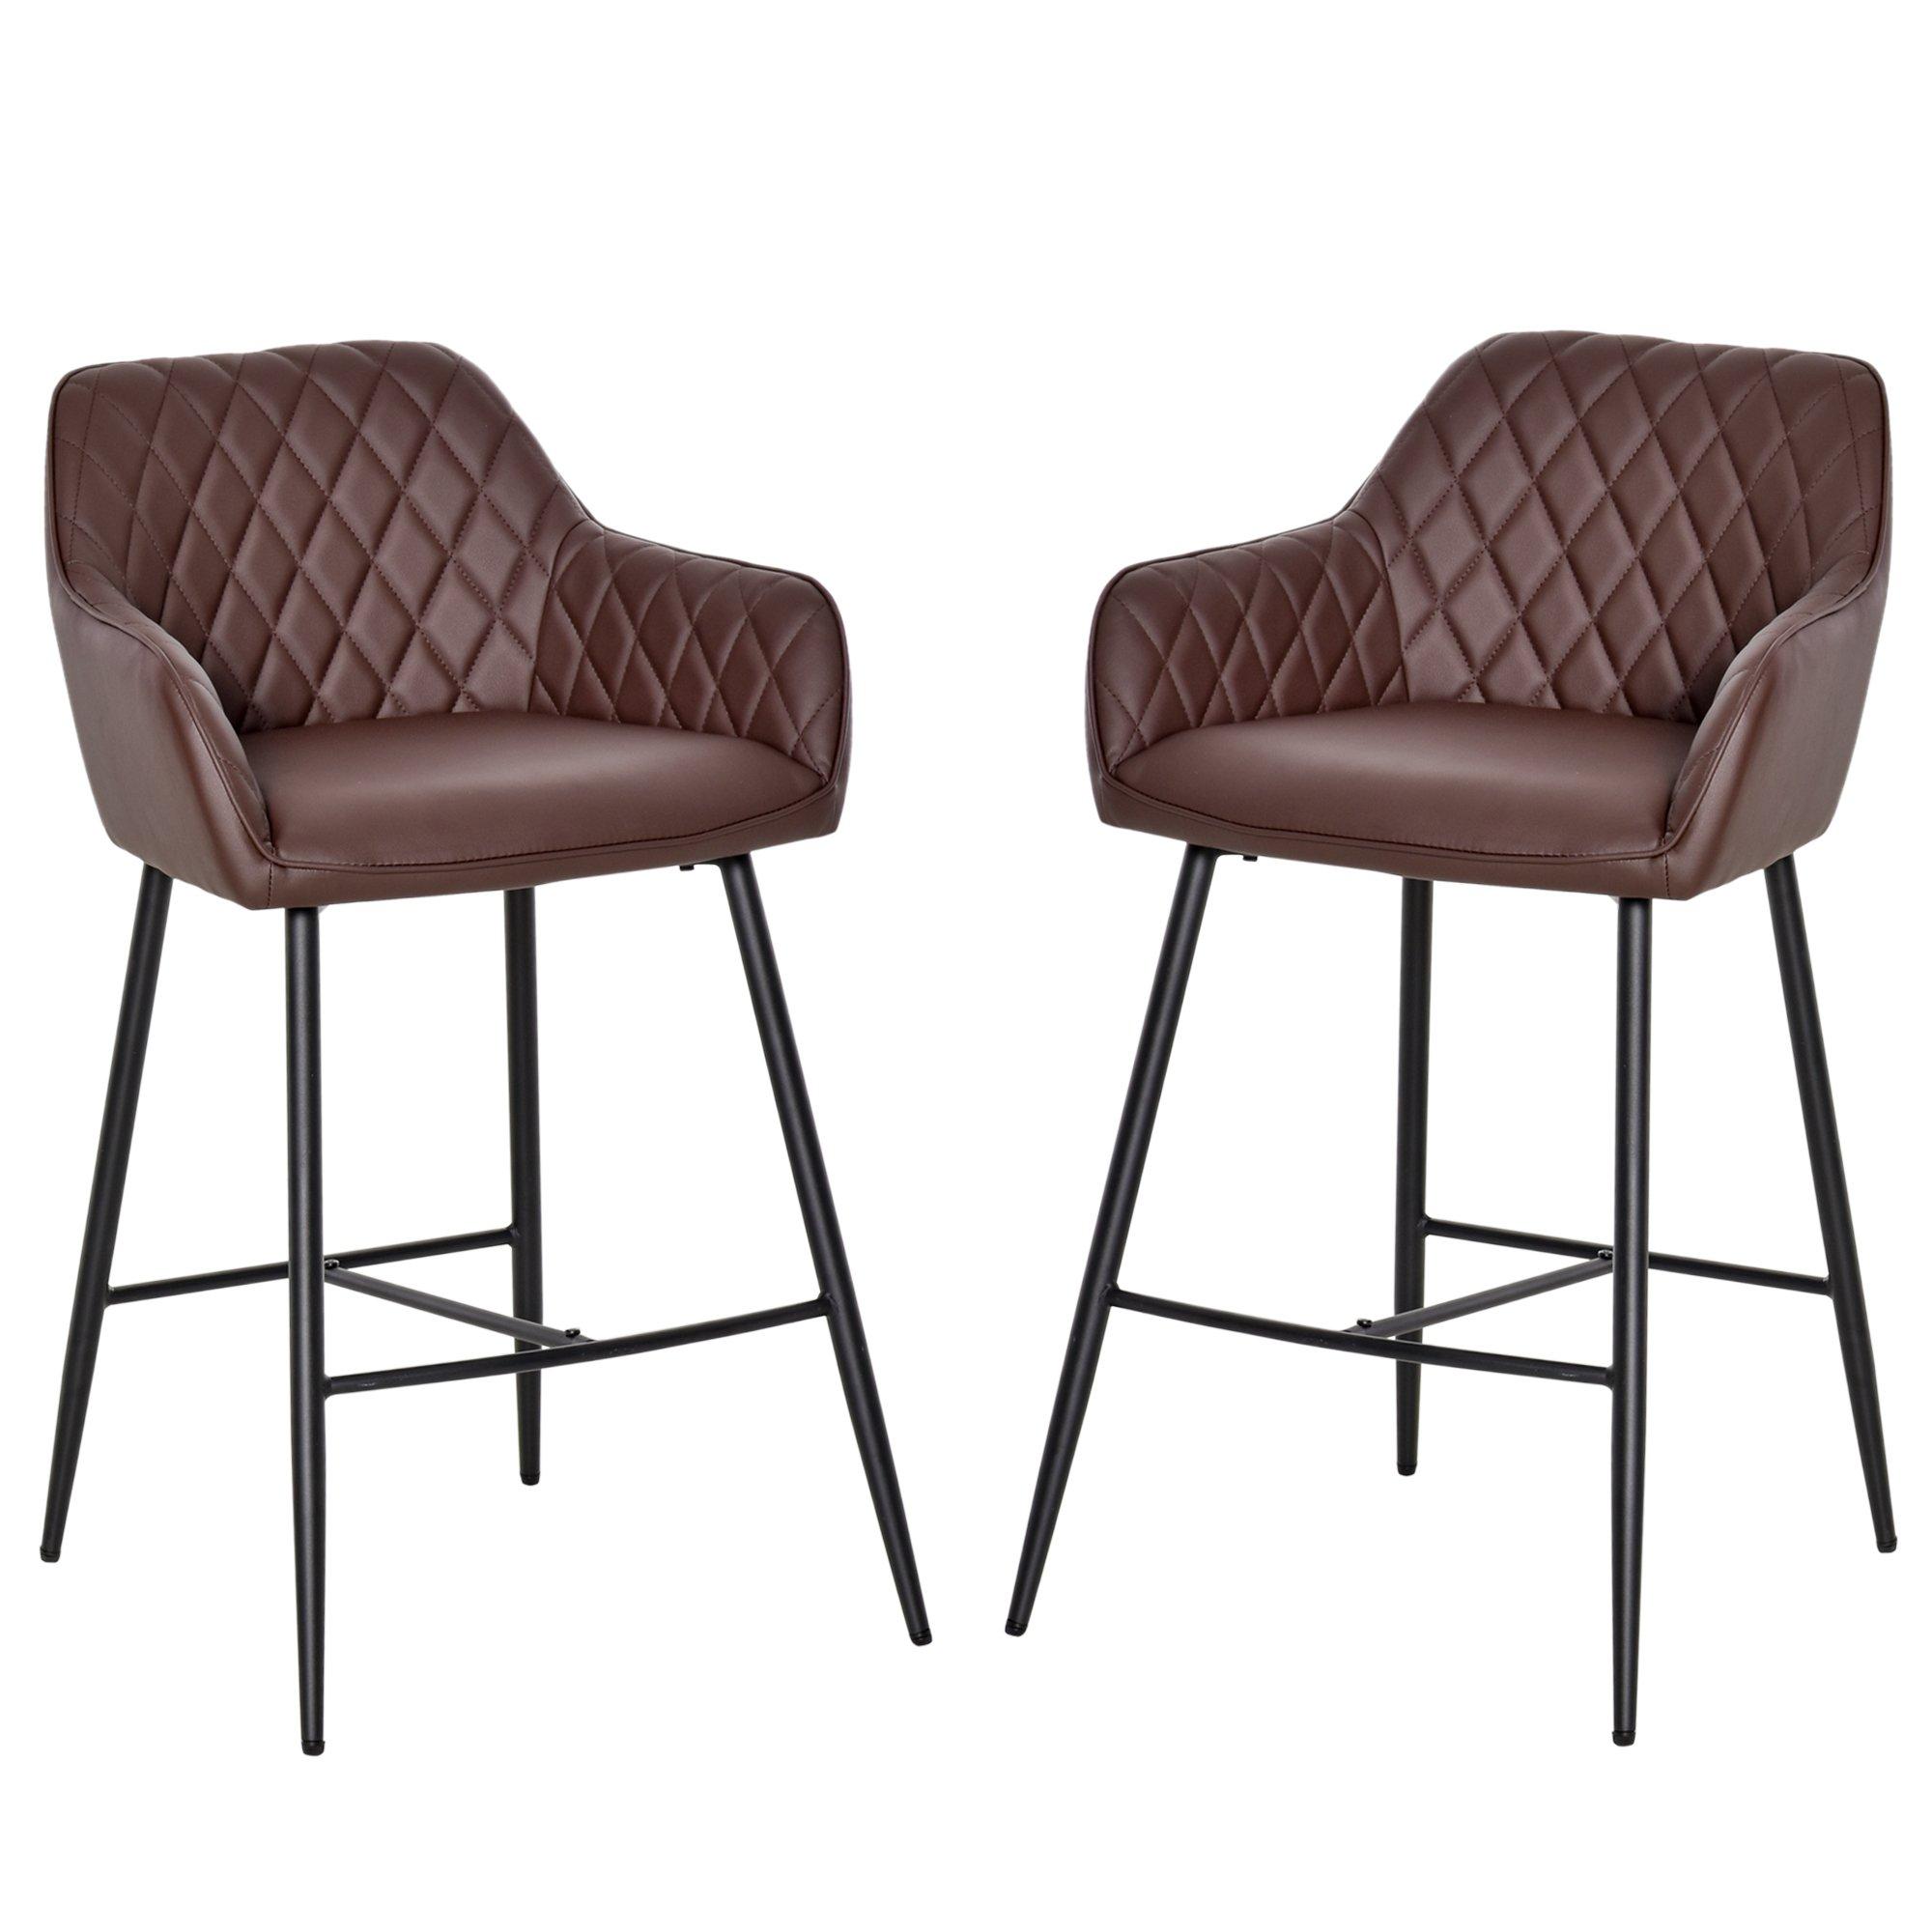 Retro Style Bar Chairs Set of 2 with Footrest Solid Frame PU